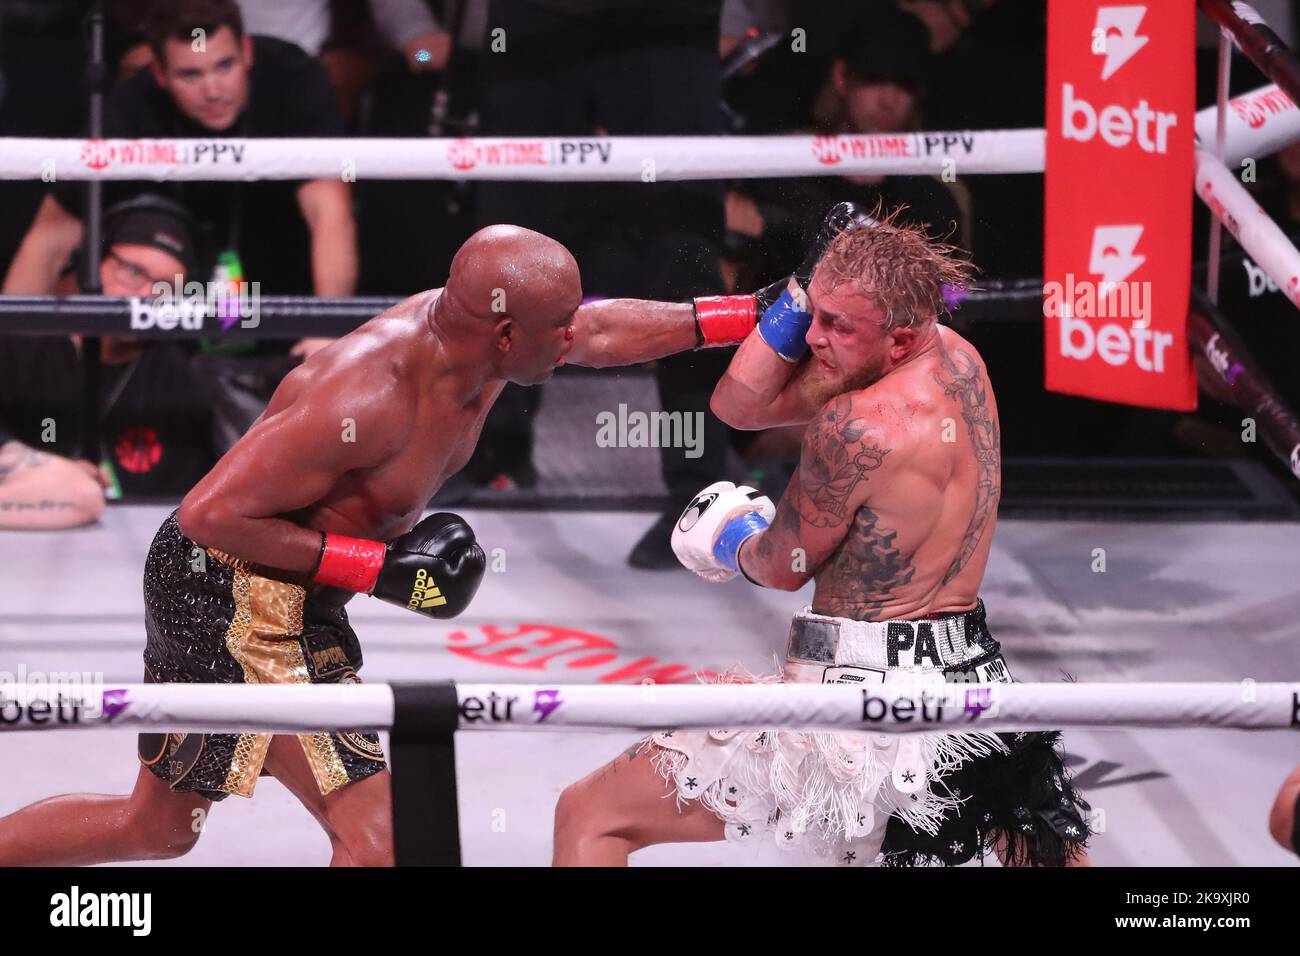 GLENDALE, AZ - OCTOBER 29: Jake Paul and Anderson Silva meet in the boxing ring for their Cruiserweight bout at Showtime’s Paul vs Silva PPV Event at the Desert Diamond Arena on October 29, 2022 in Glendale, Arizona, United States.(Photo by Alejandro Salazar/PxImages) Stock Photo